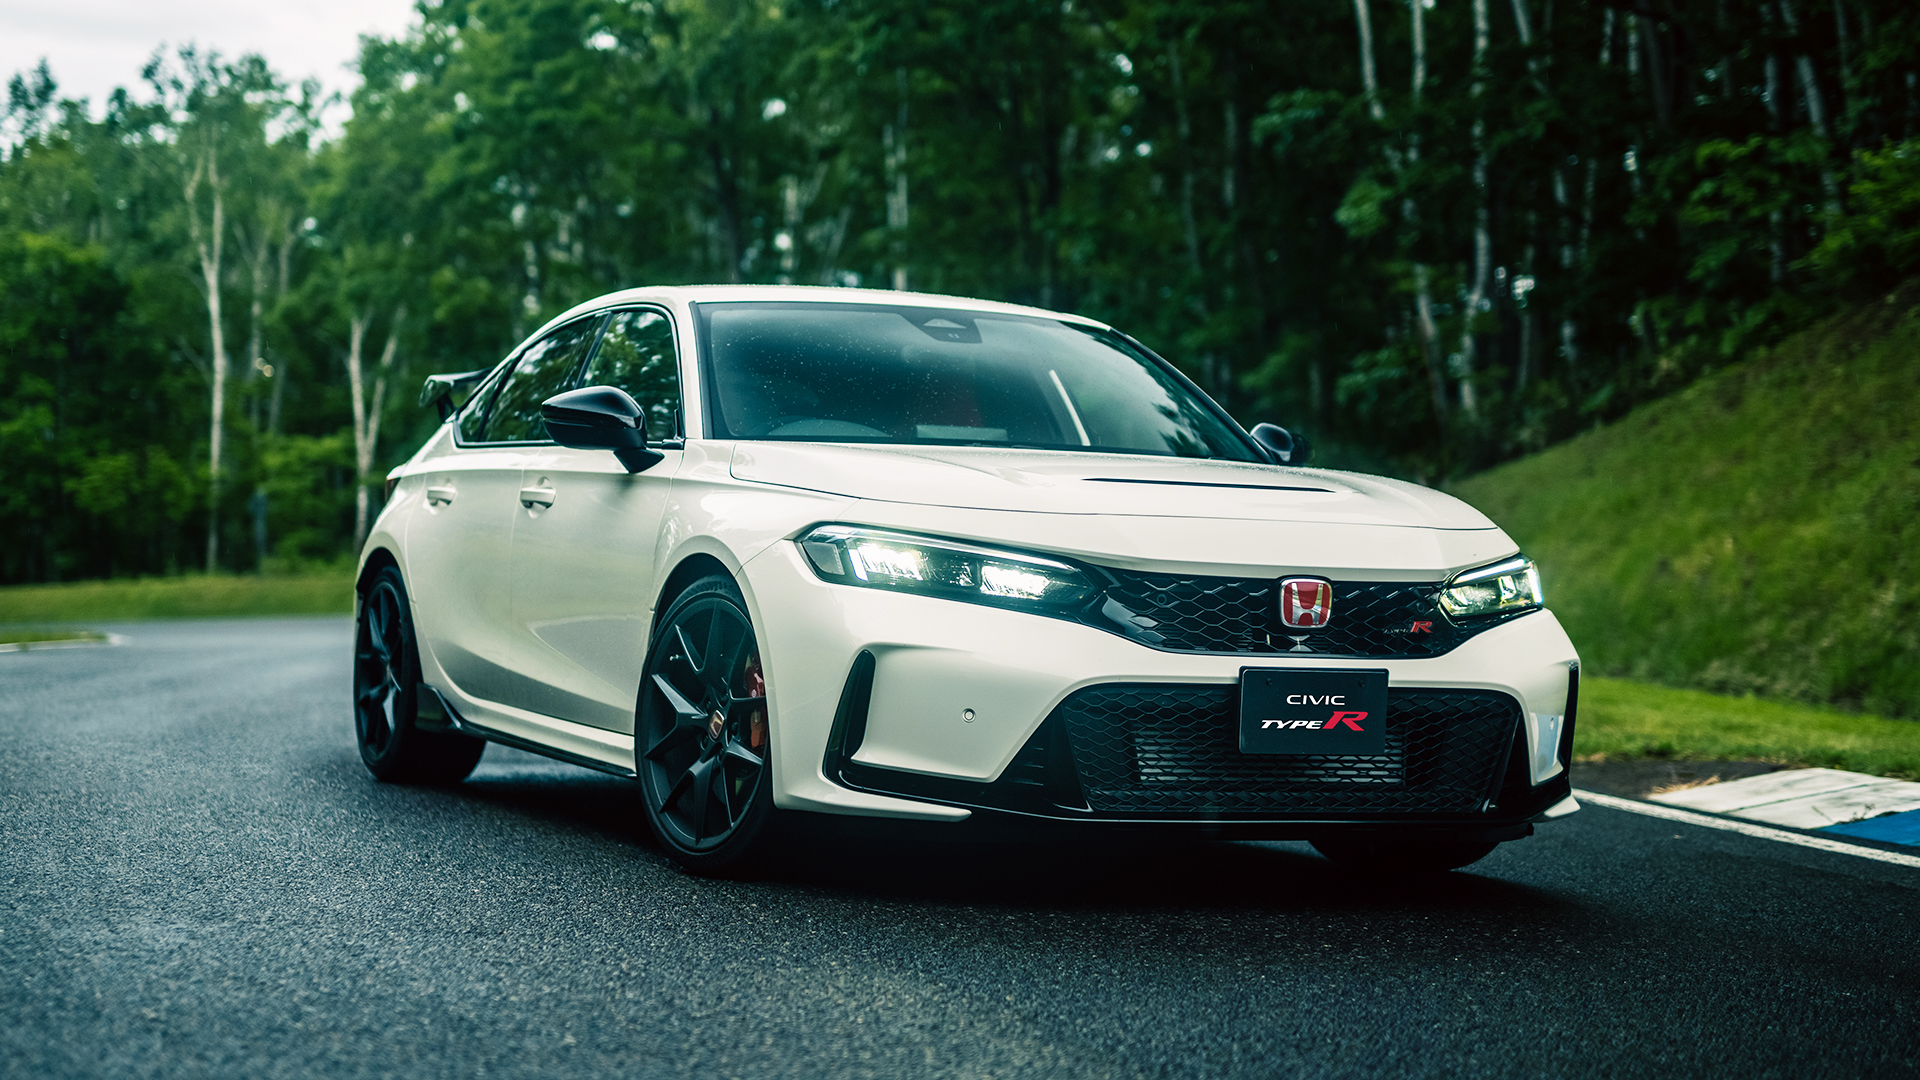 Honda Civic Type R Black Edition Marks End of Current Generation